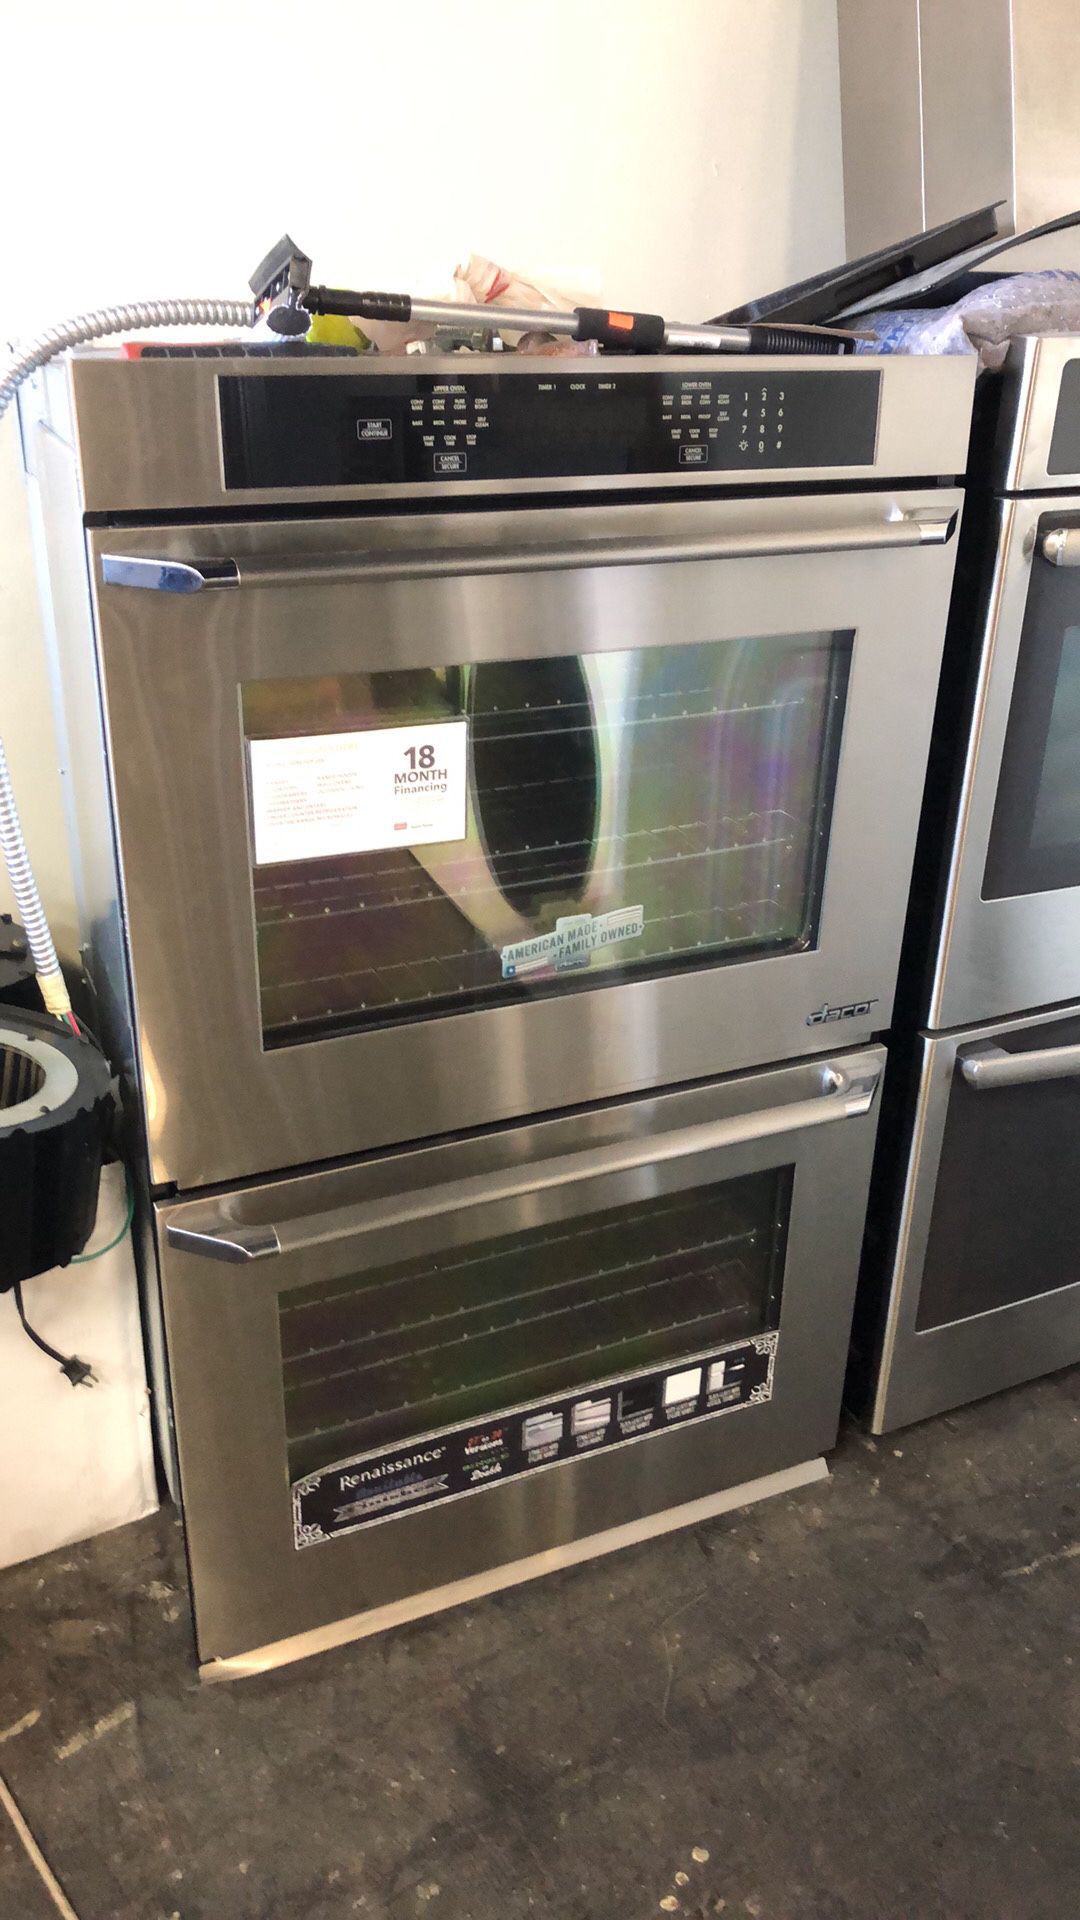 Dacor 30” Stainless Steel Double Wall Oven 